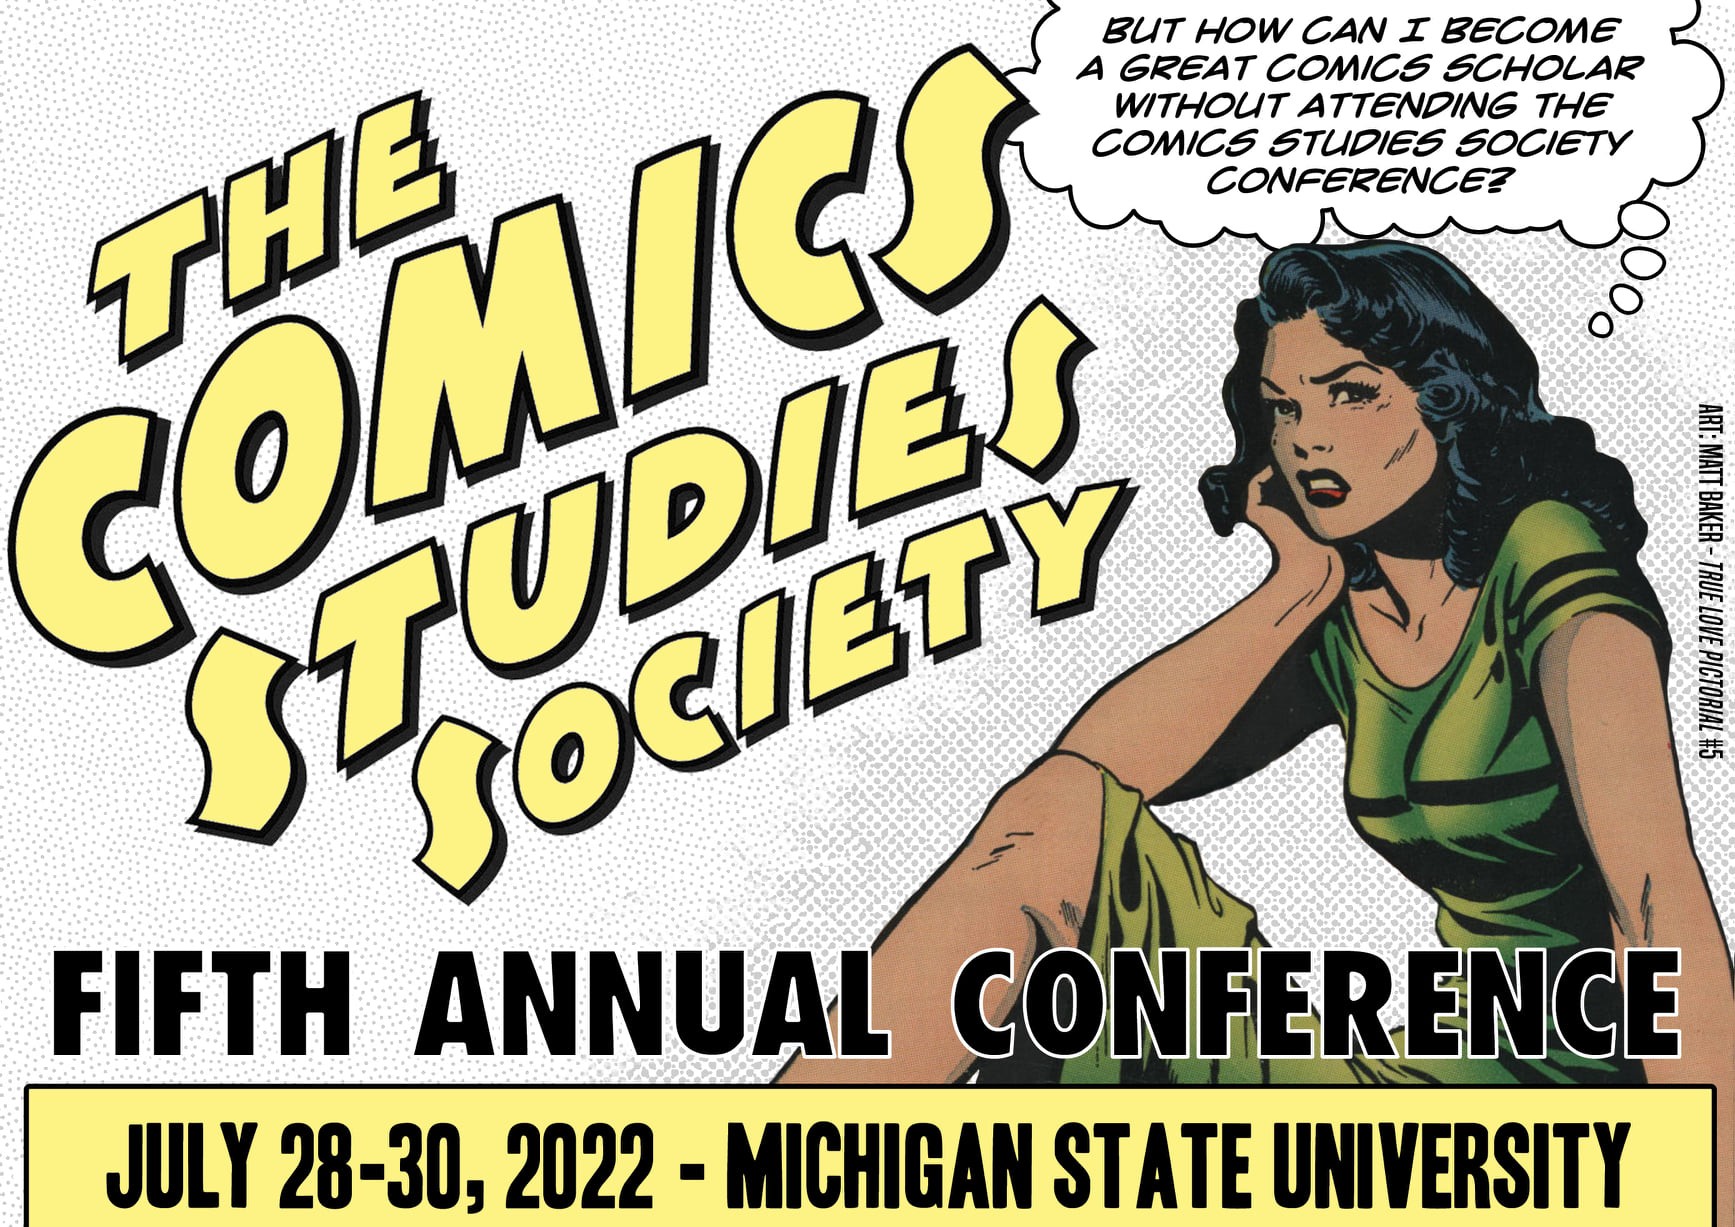 MSU: A Leader in Comics and Pop Culture Scholarship, Now Host to Comics Studies Society